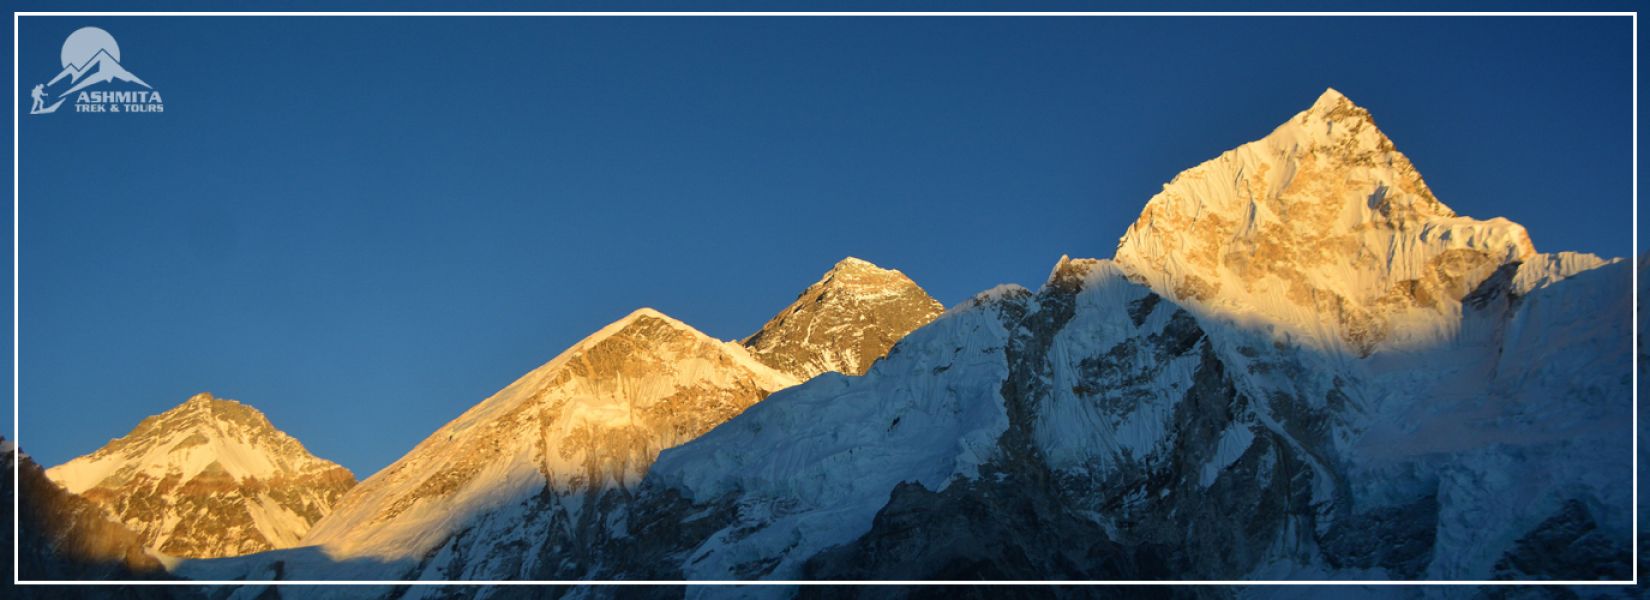 Everest Region, home to the world's tallest Mountain